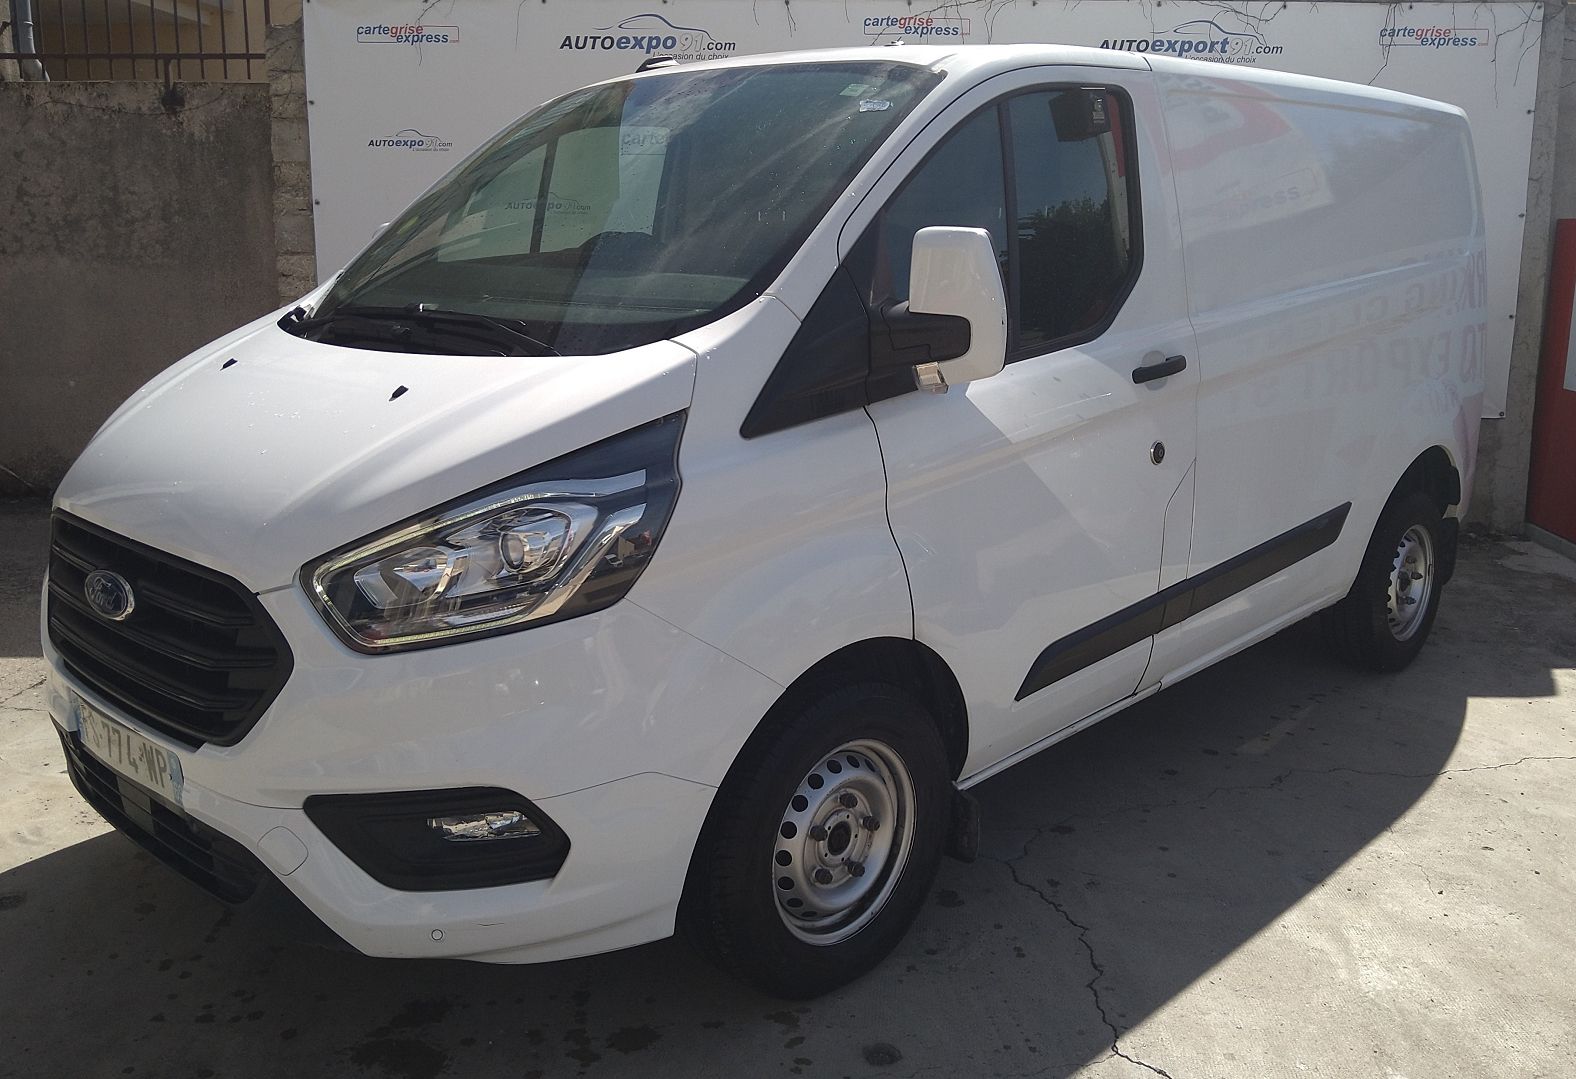 Annonce Ford transit custom (2) 2.0 ecoblue 130 mhev 280 l1h1